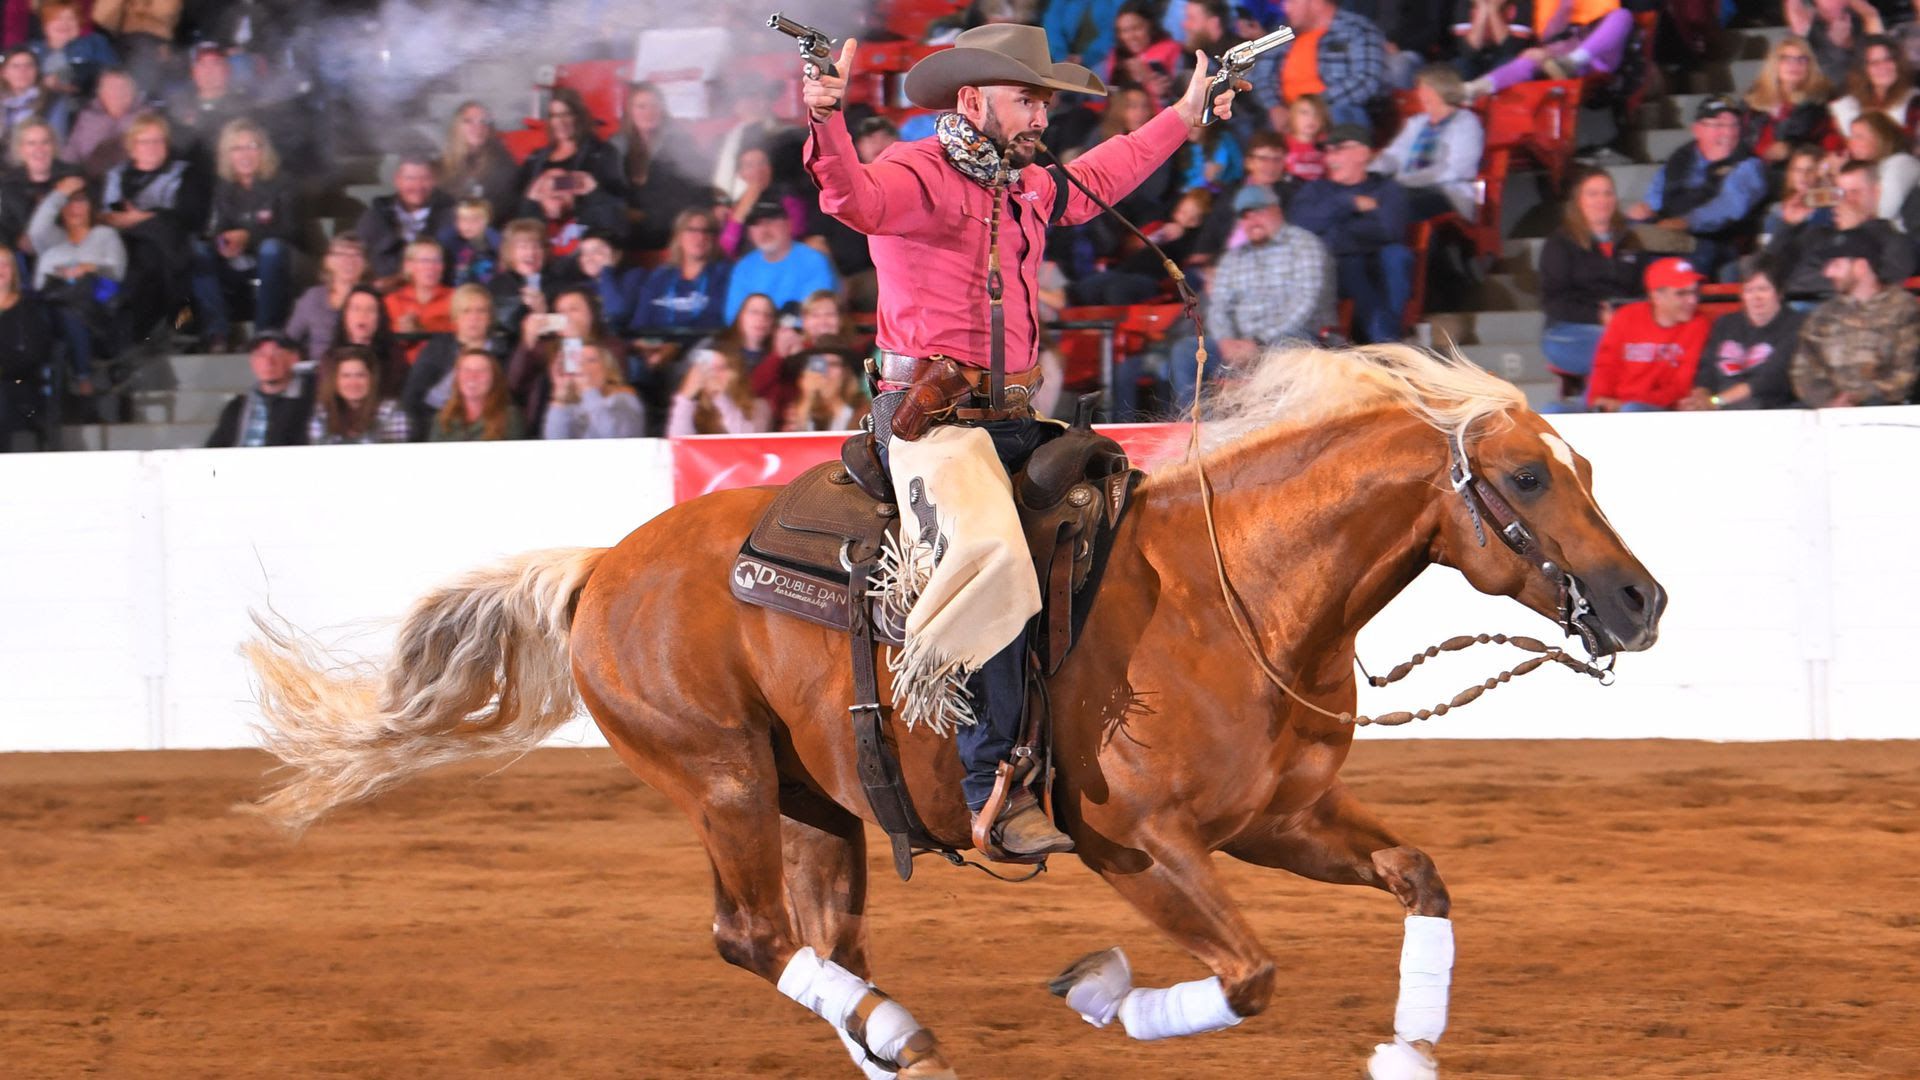 A cowboy wearing a red shirt shoots pistols while on the back of a galloping American quarter horse. 